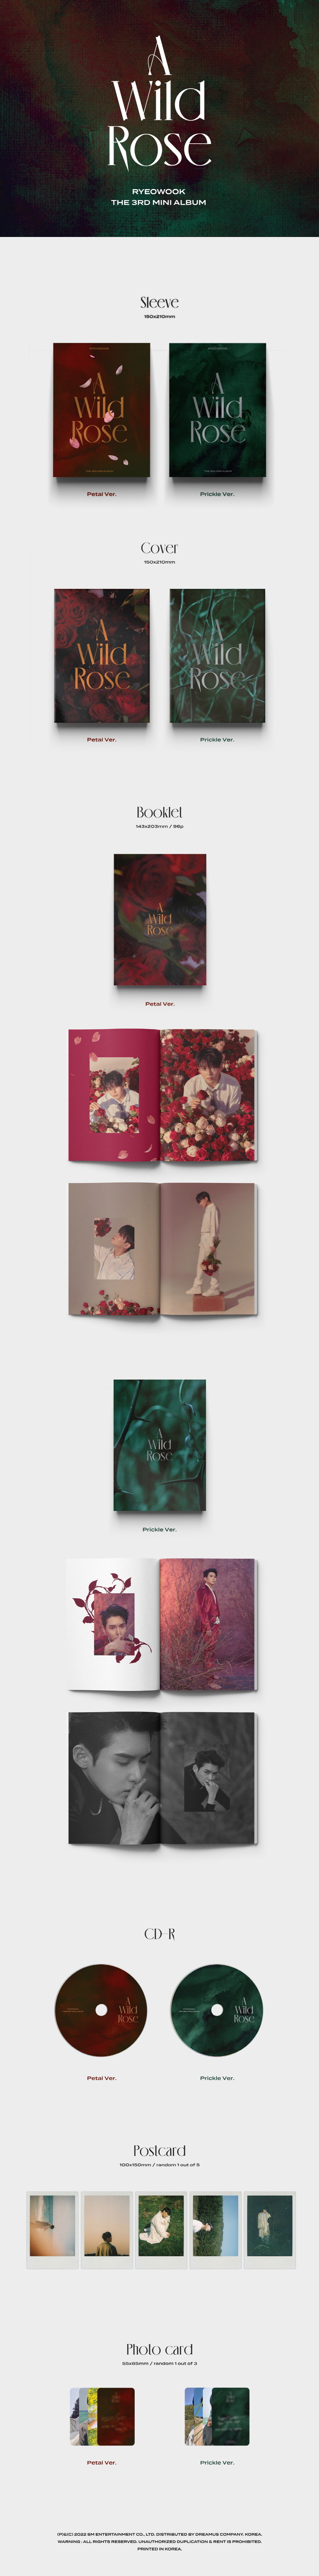 RYEOWOOK - A Wild Rose (Petal+Prickle Ver. SET) / 3rd Mini Album album rose ryeowook cd RYEOWOOKalbum AWildRose SM RYEOWOOKcd